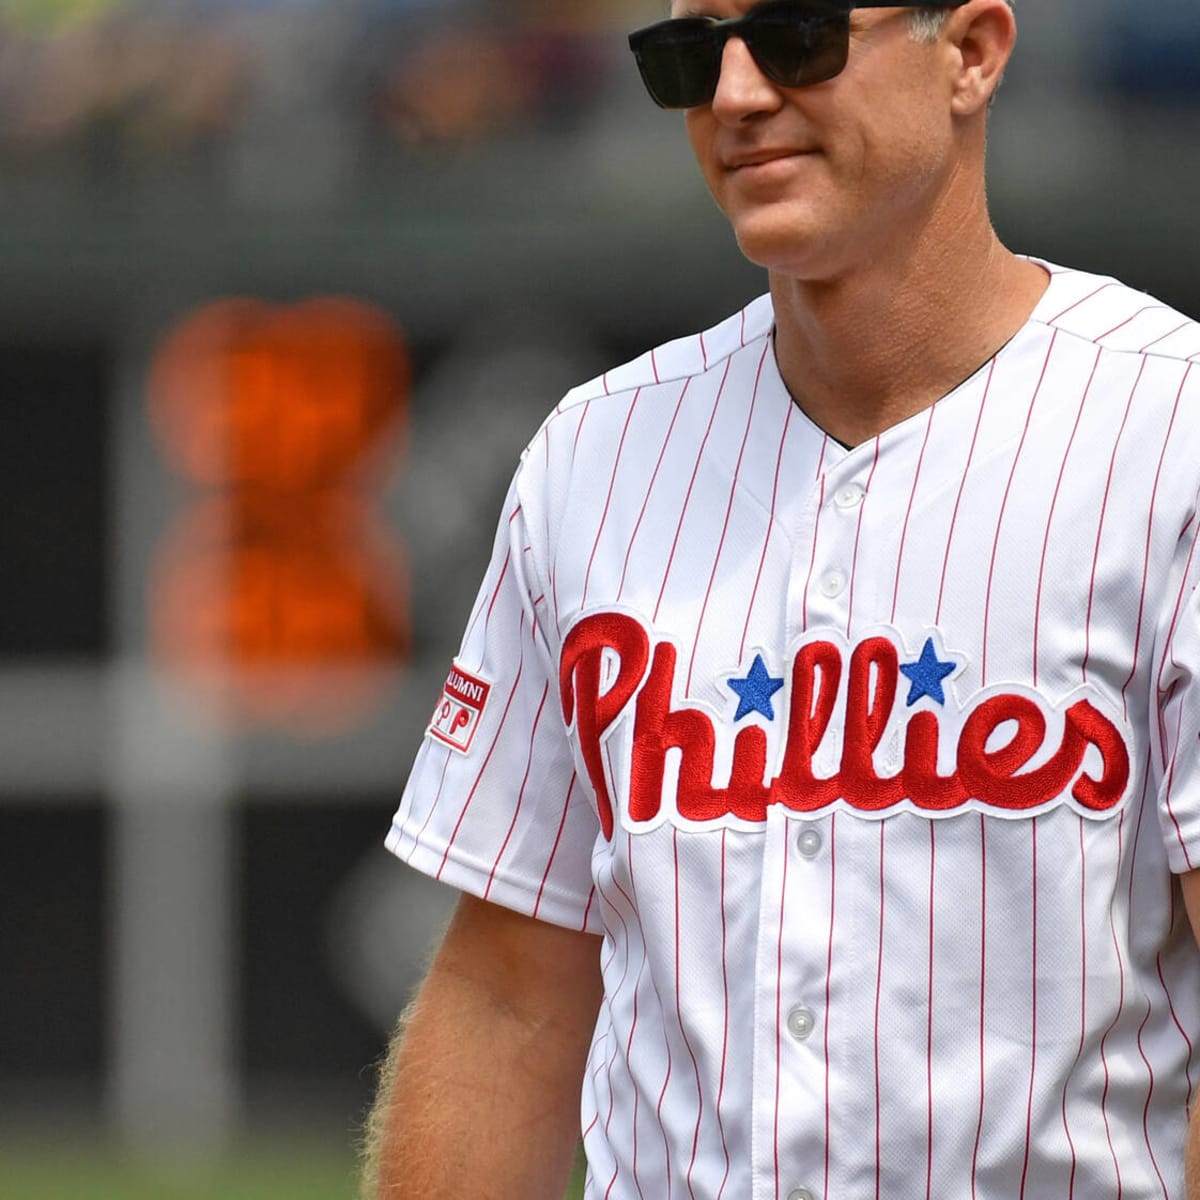 Chase Utley is moving to England to spread the gospel of baseball